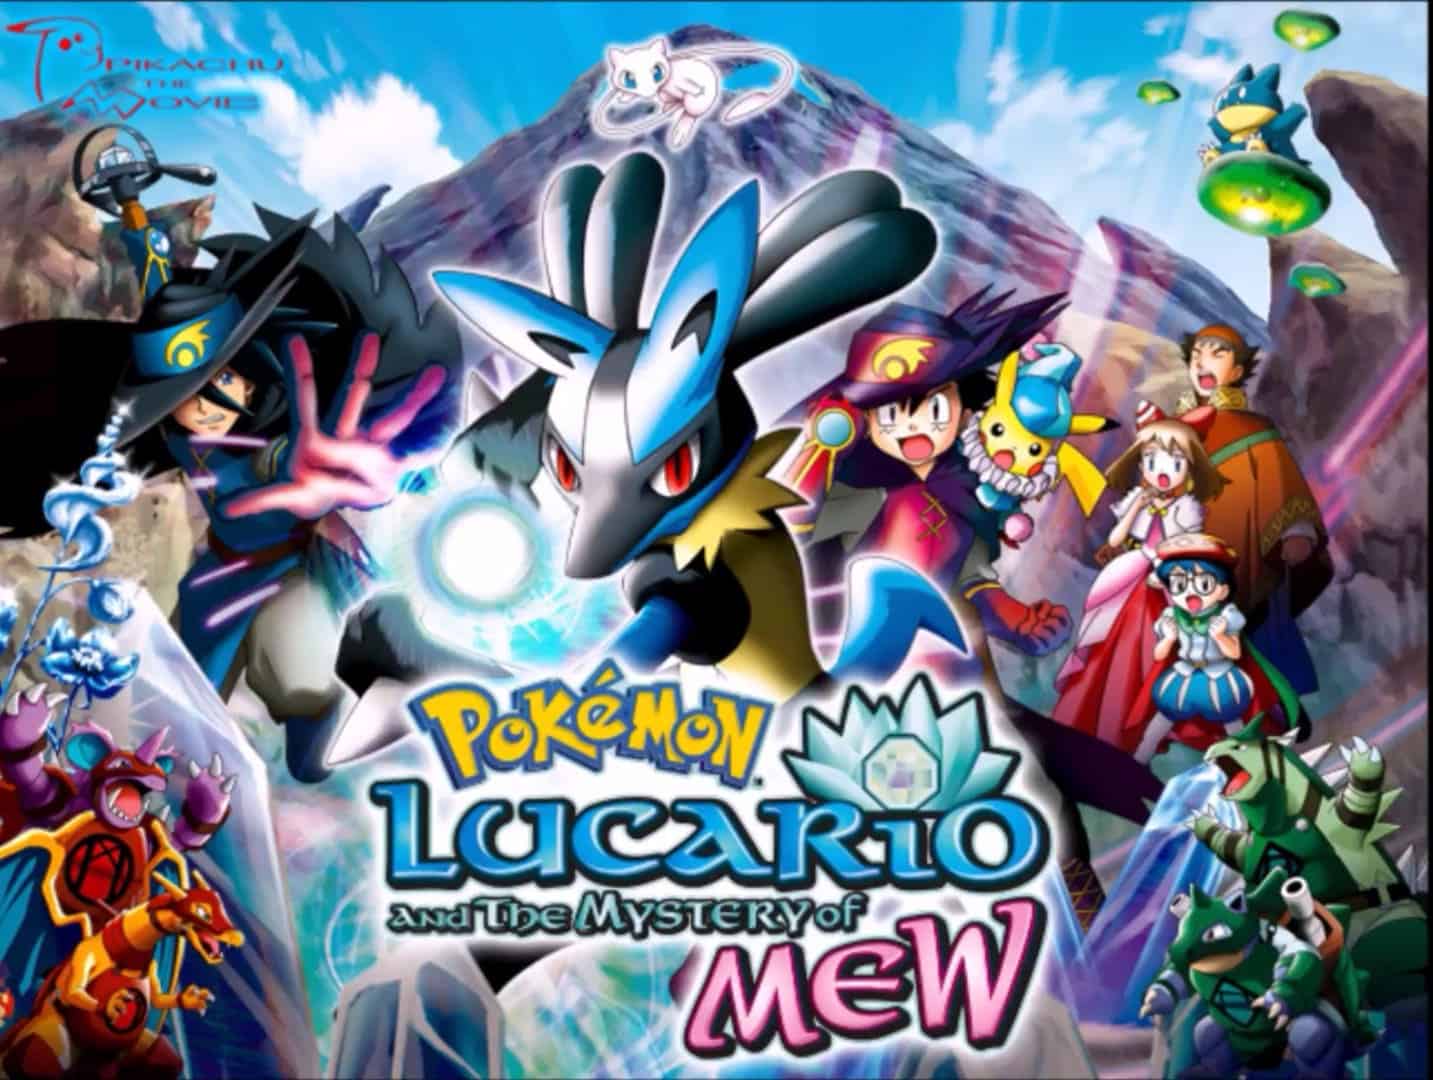 Pokemon: Lucario and Mystery of Mew